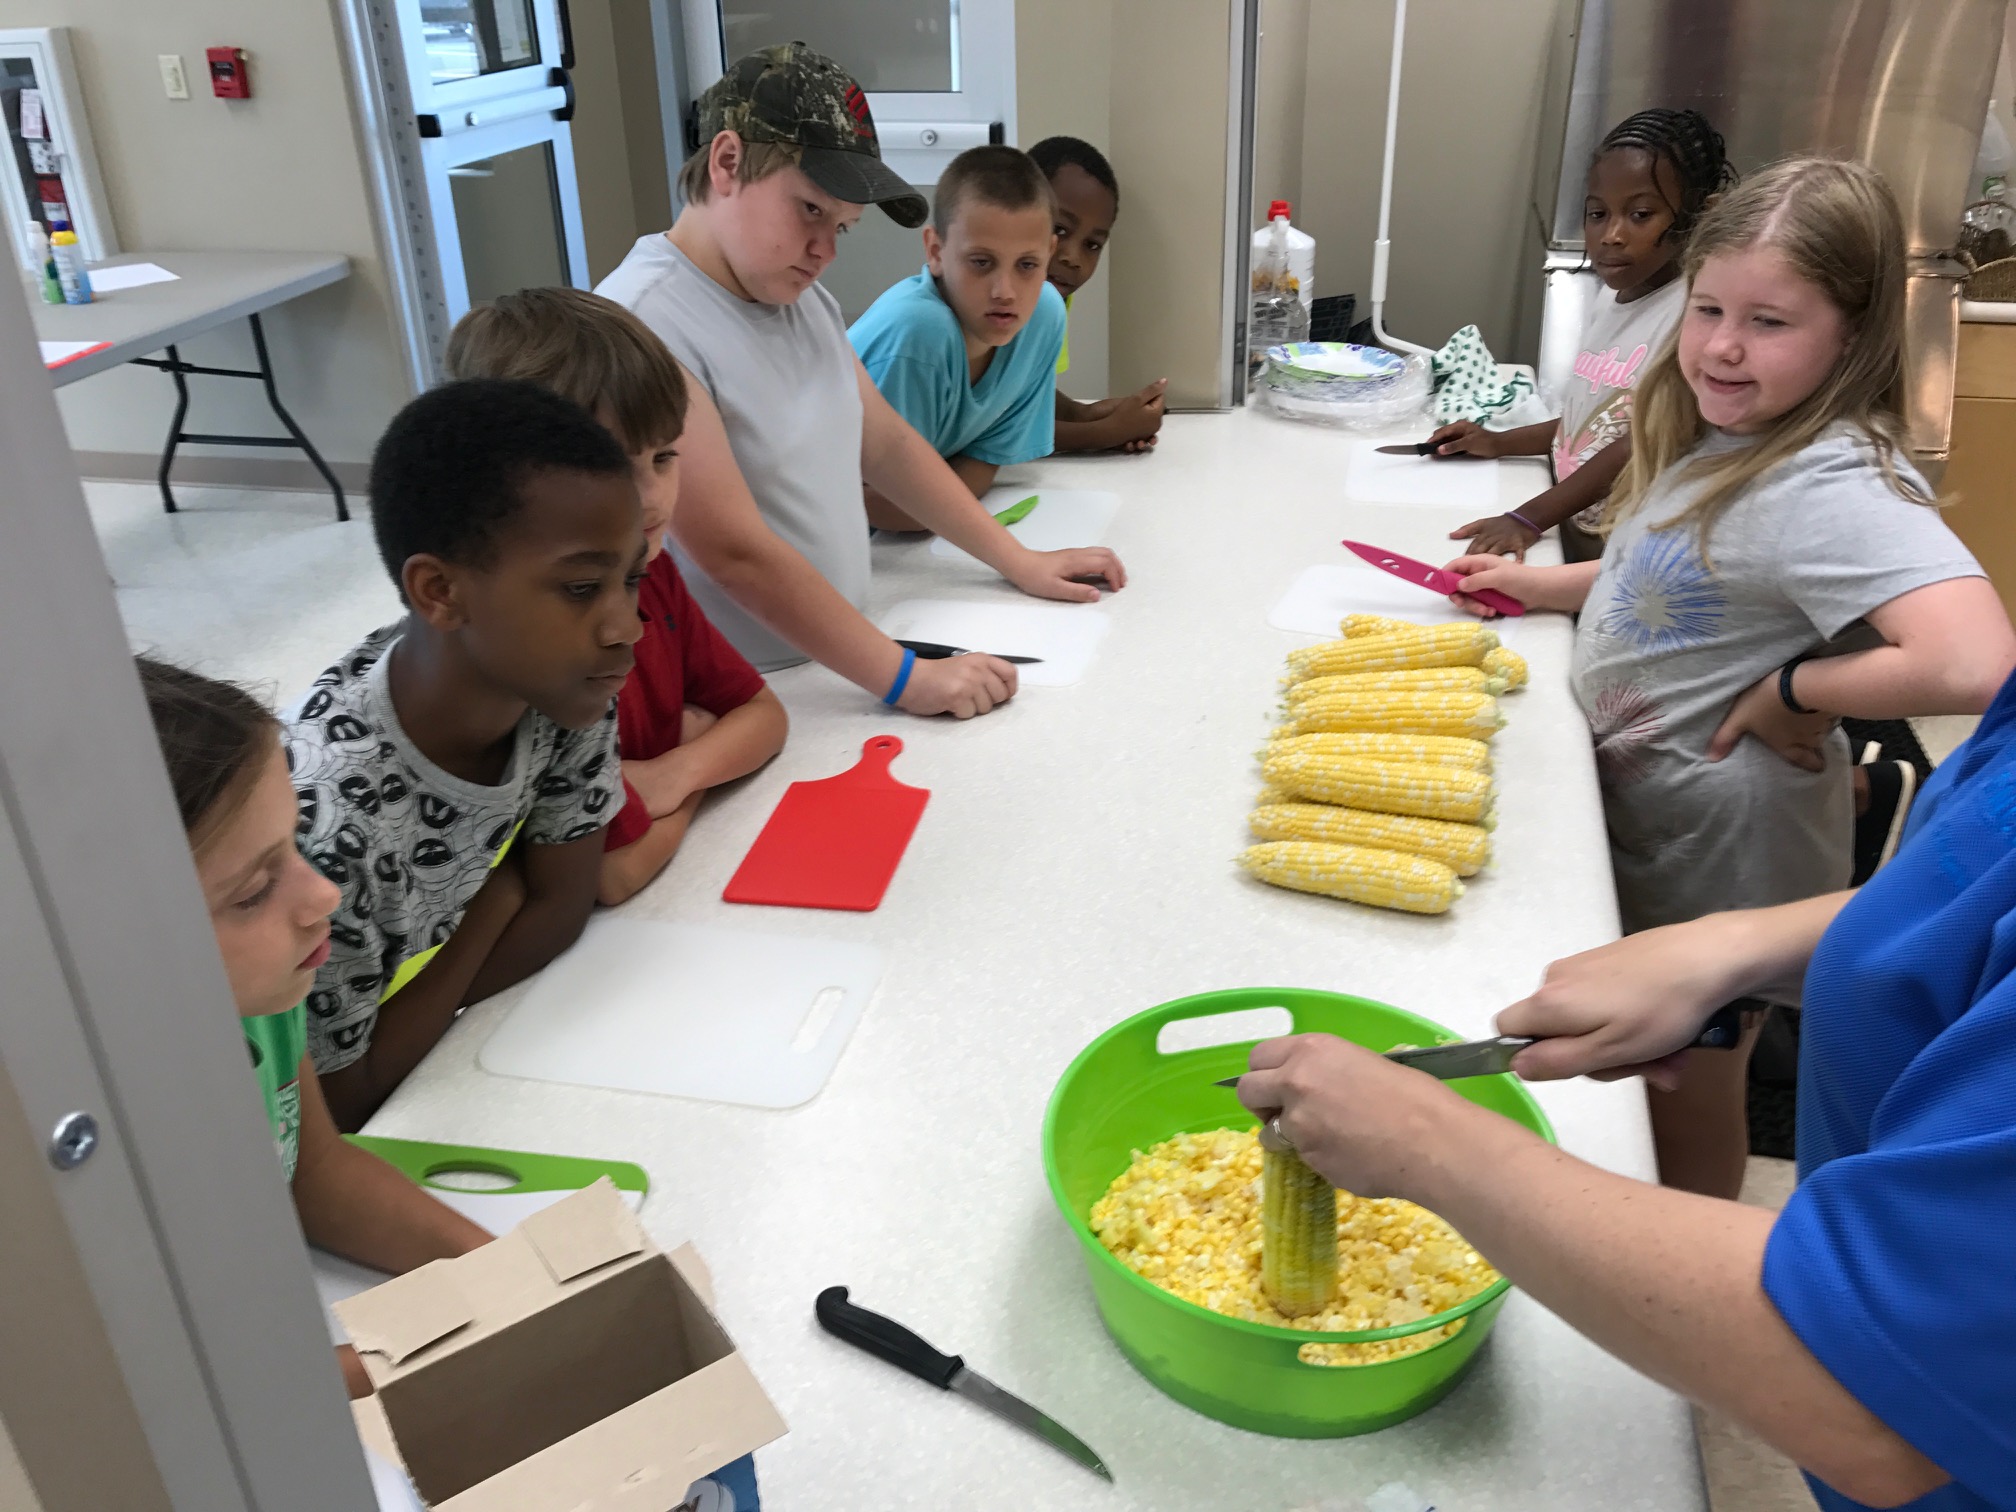 Children watch as an adult cuts corn kernels from the ear.